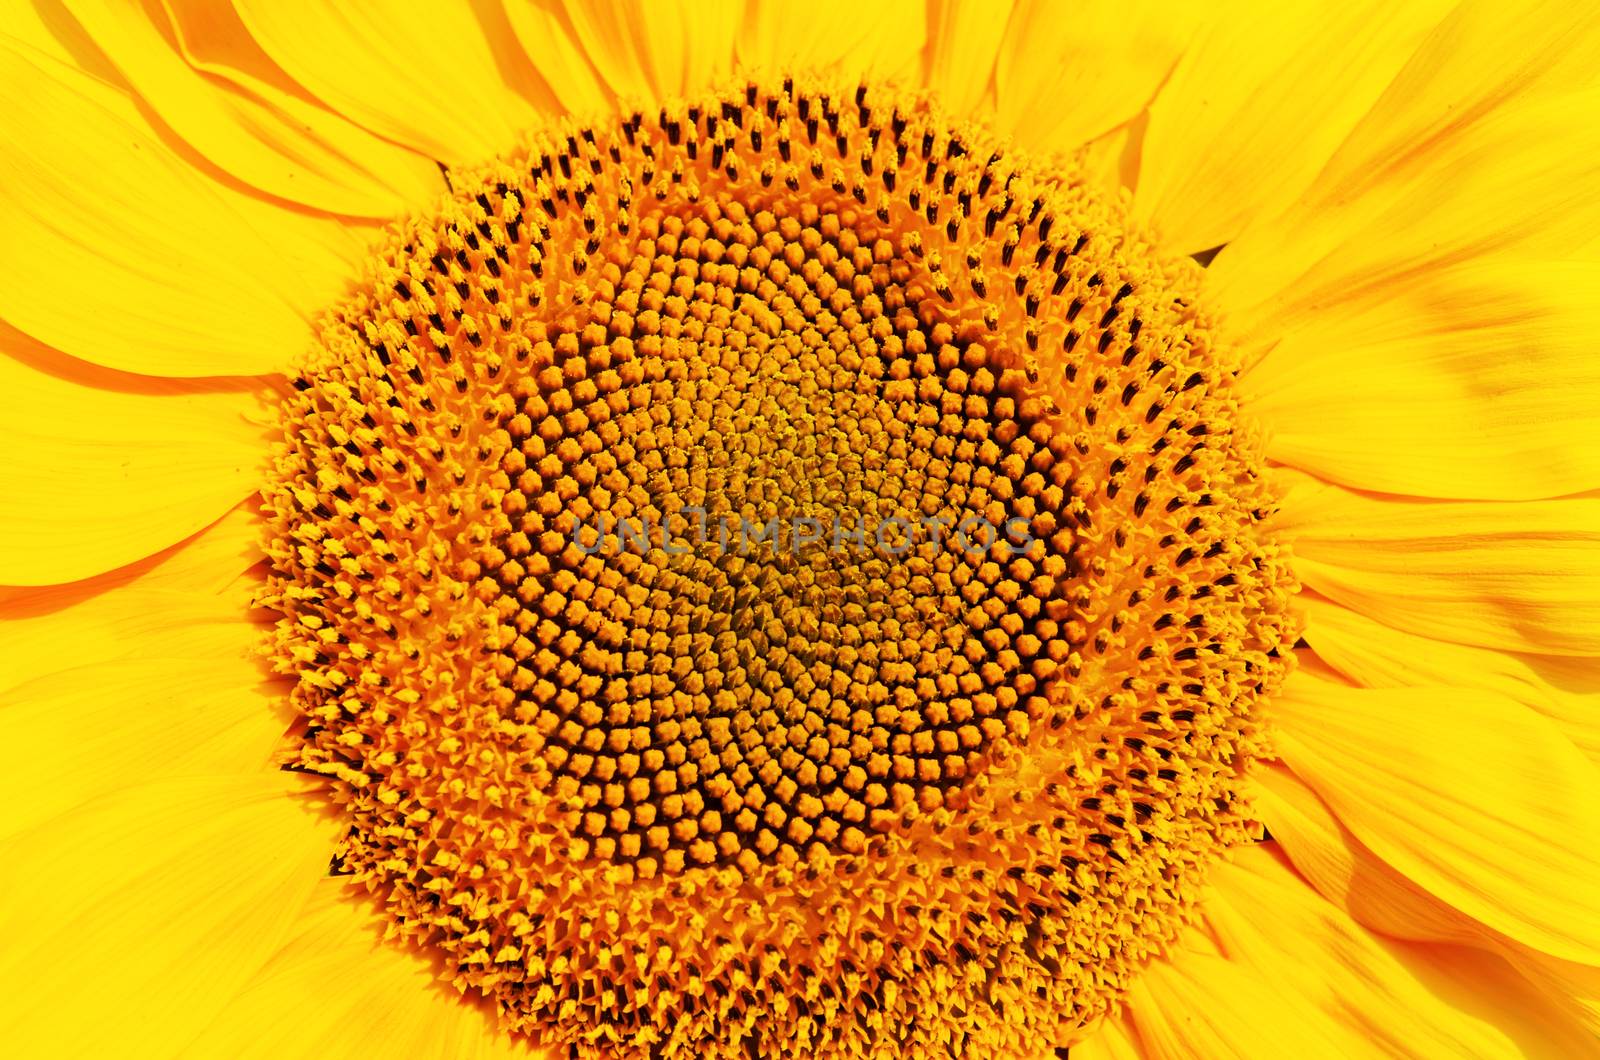 central part of sunflower by mycola